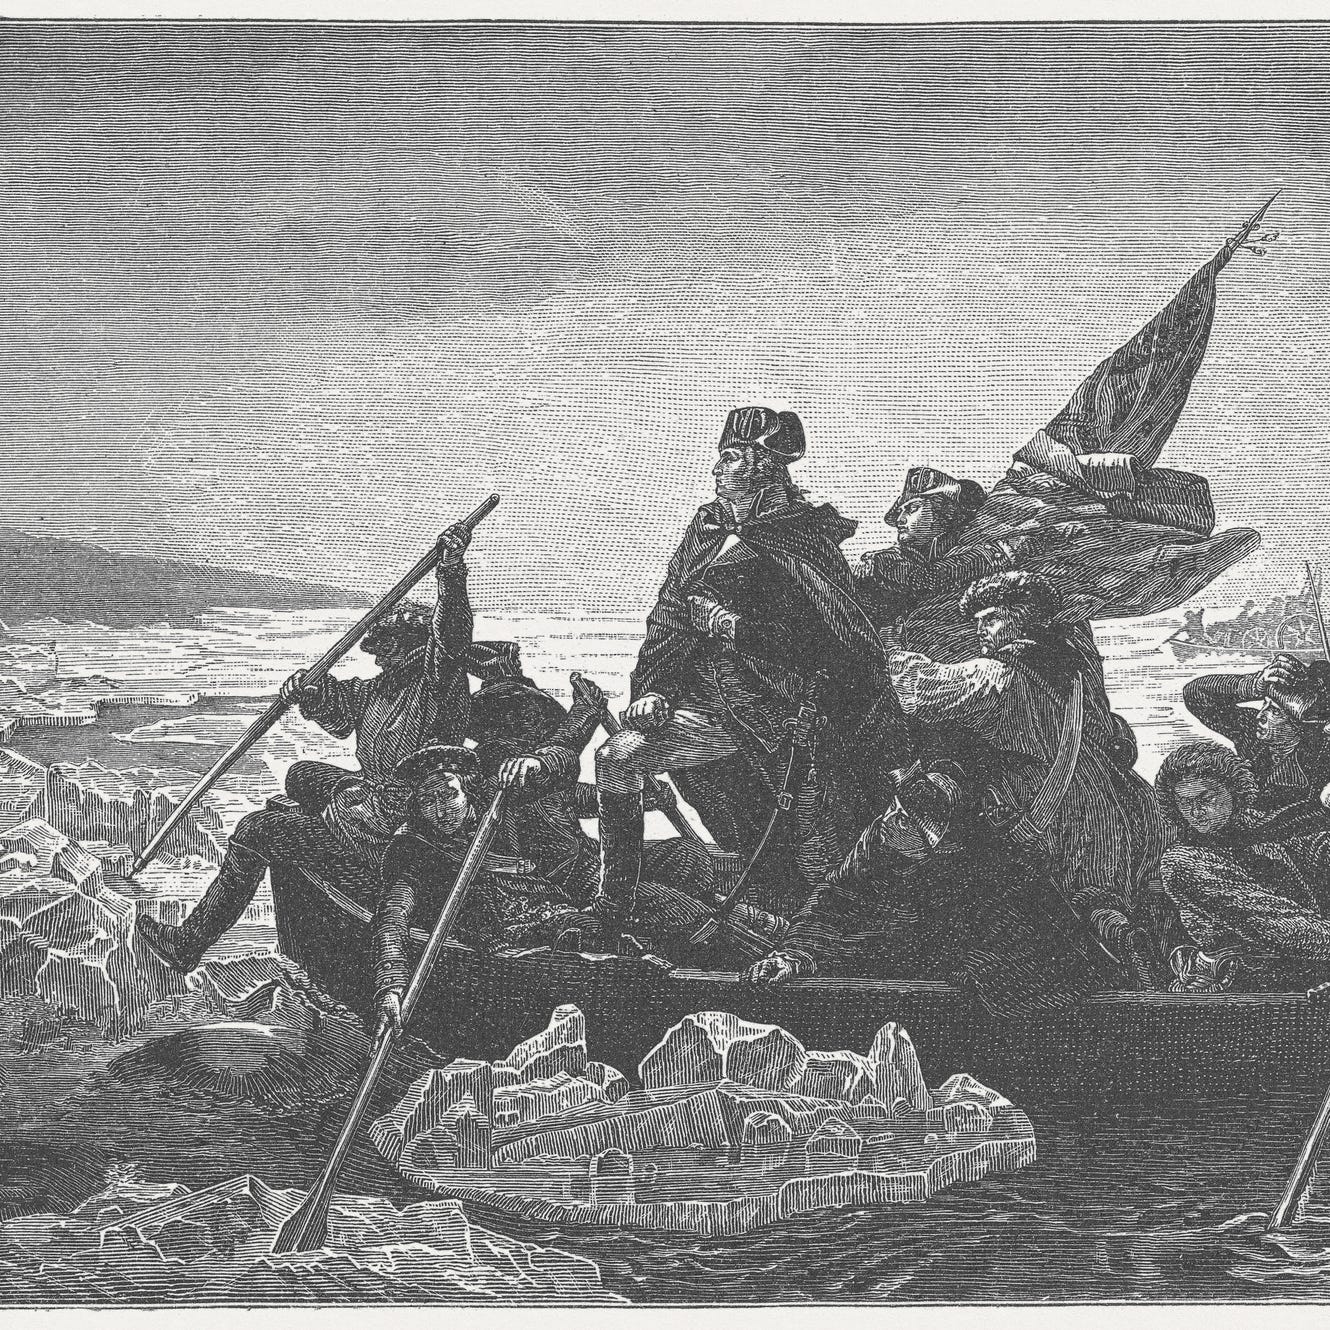 Washington's crossing of the Delaware River, which occurred on the night of December 25–26, 1776, during the American Revolutionary War. Wood engraving after a painting (1851) by Emanuel Gottlieb Leutze (German American history painter, 1816 - 1868),